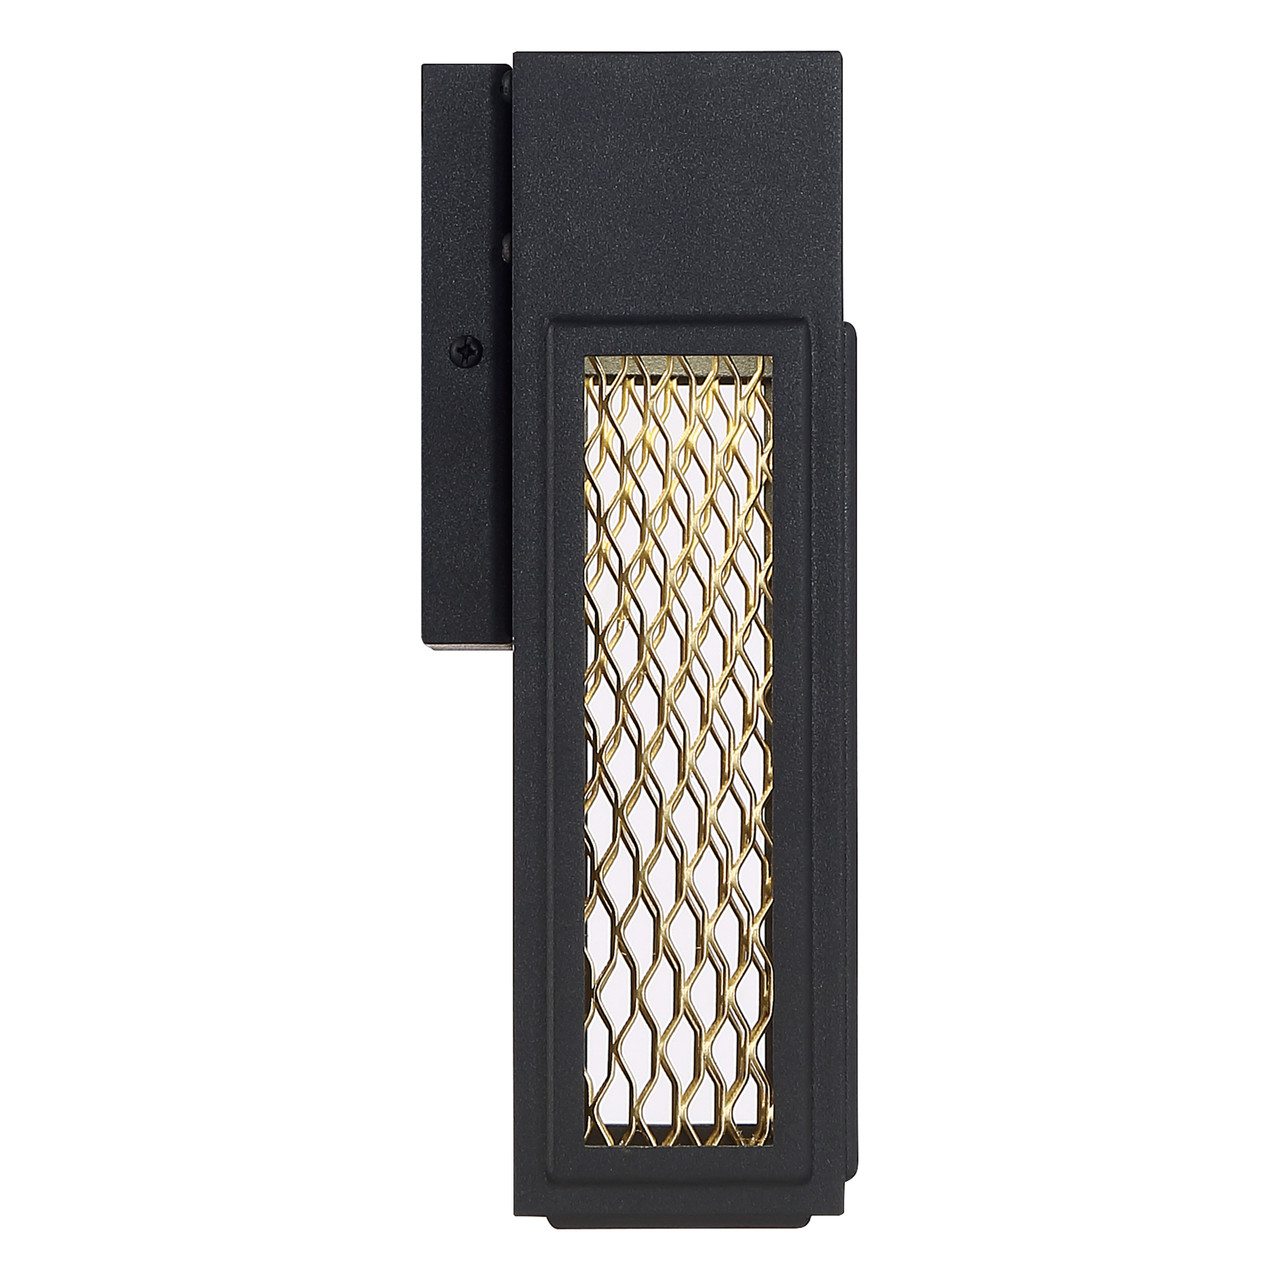 ACCESS LIGHTING 20062LEDDMG-BL/GLD Metro Marine Grade Outdoor Dimmable Wall Sconce